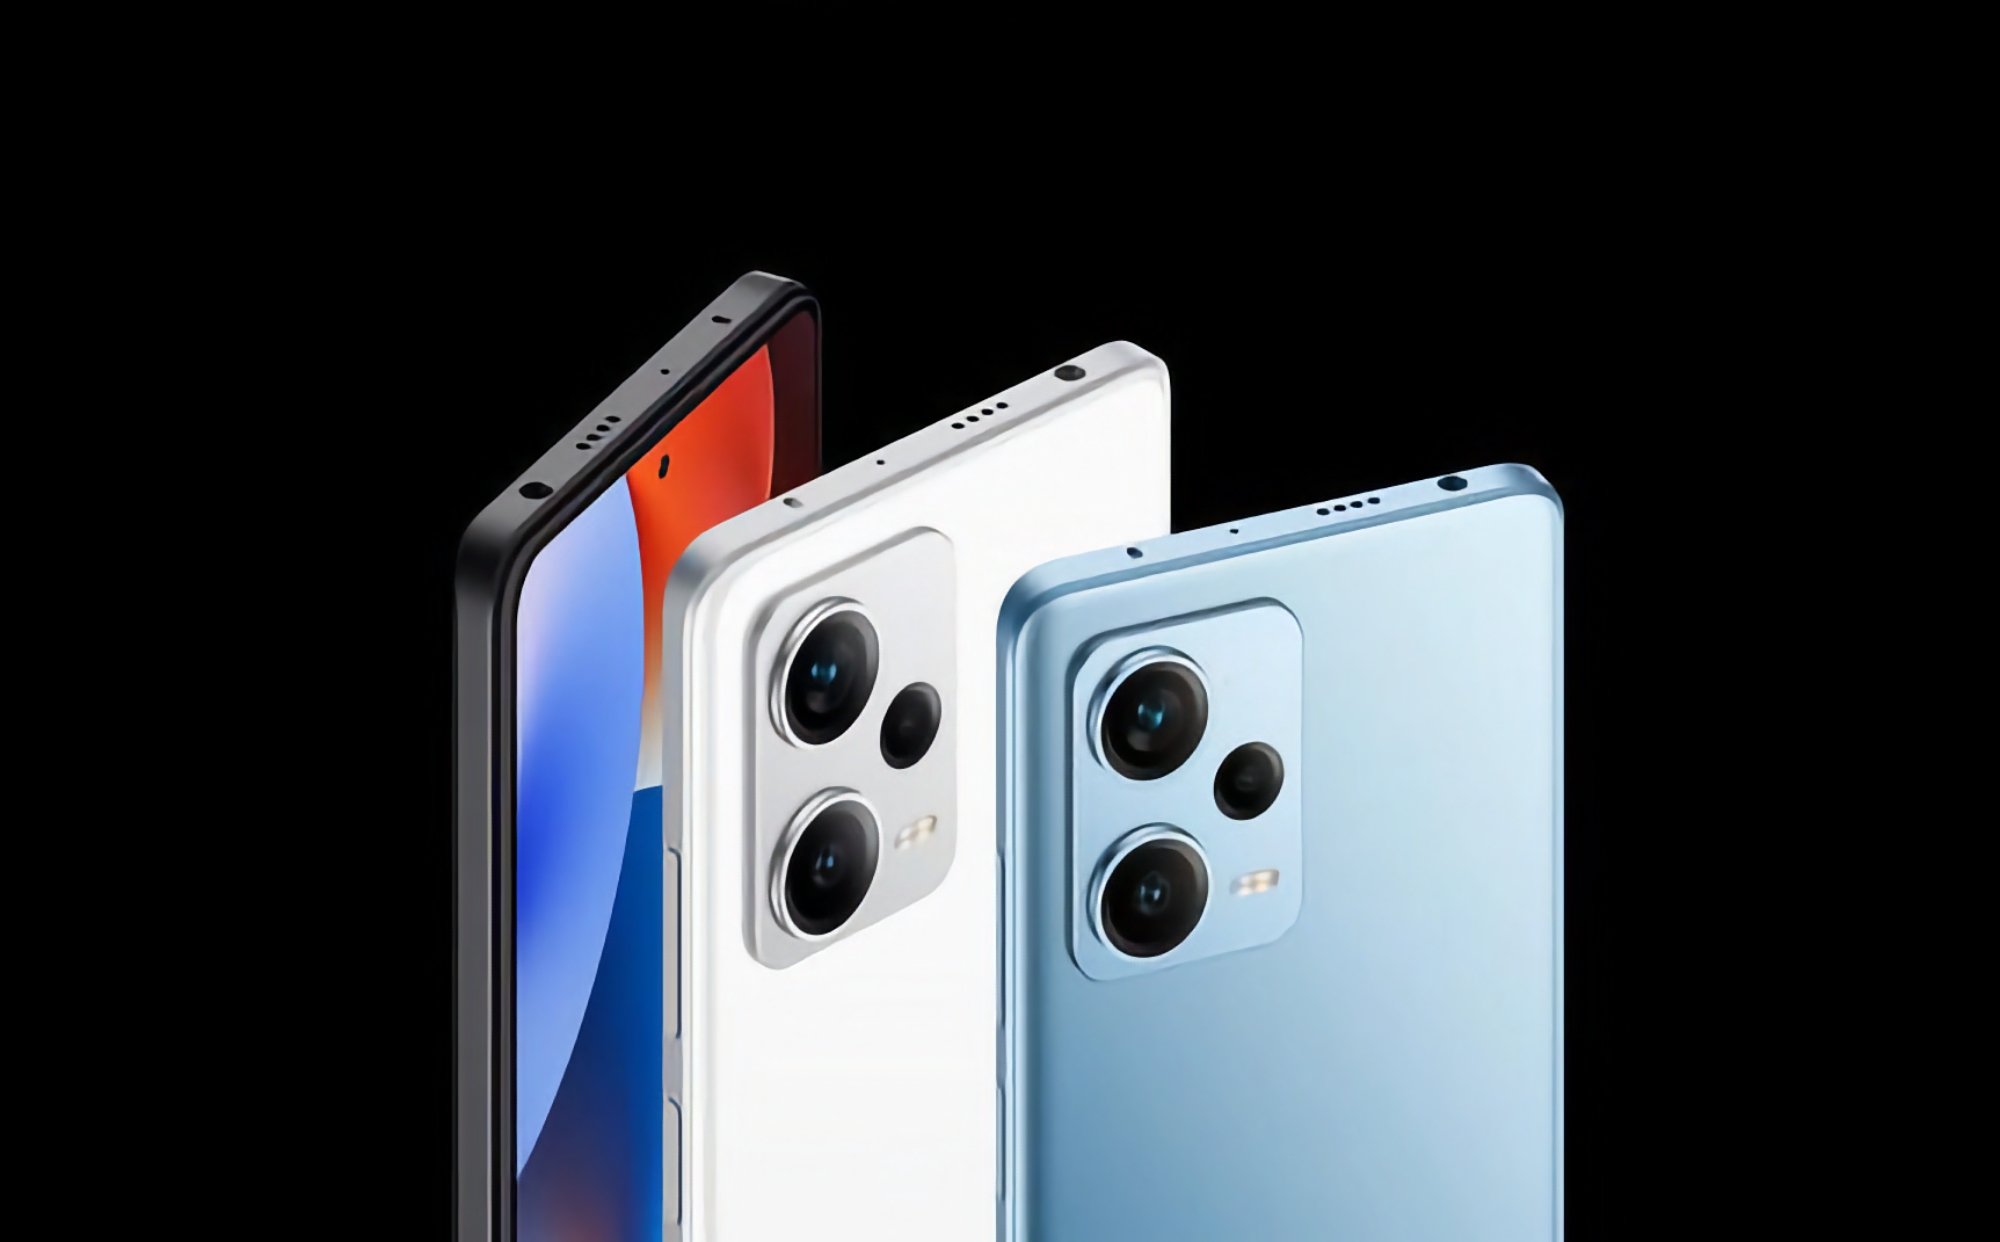 Insider reveals how much the Redmi Note 12 5G, Redmi Note 12 Pro 5G and Redmi Note 12 Pro+ 5G smartphones will cost in Europe